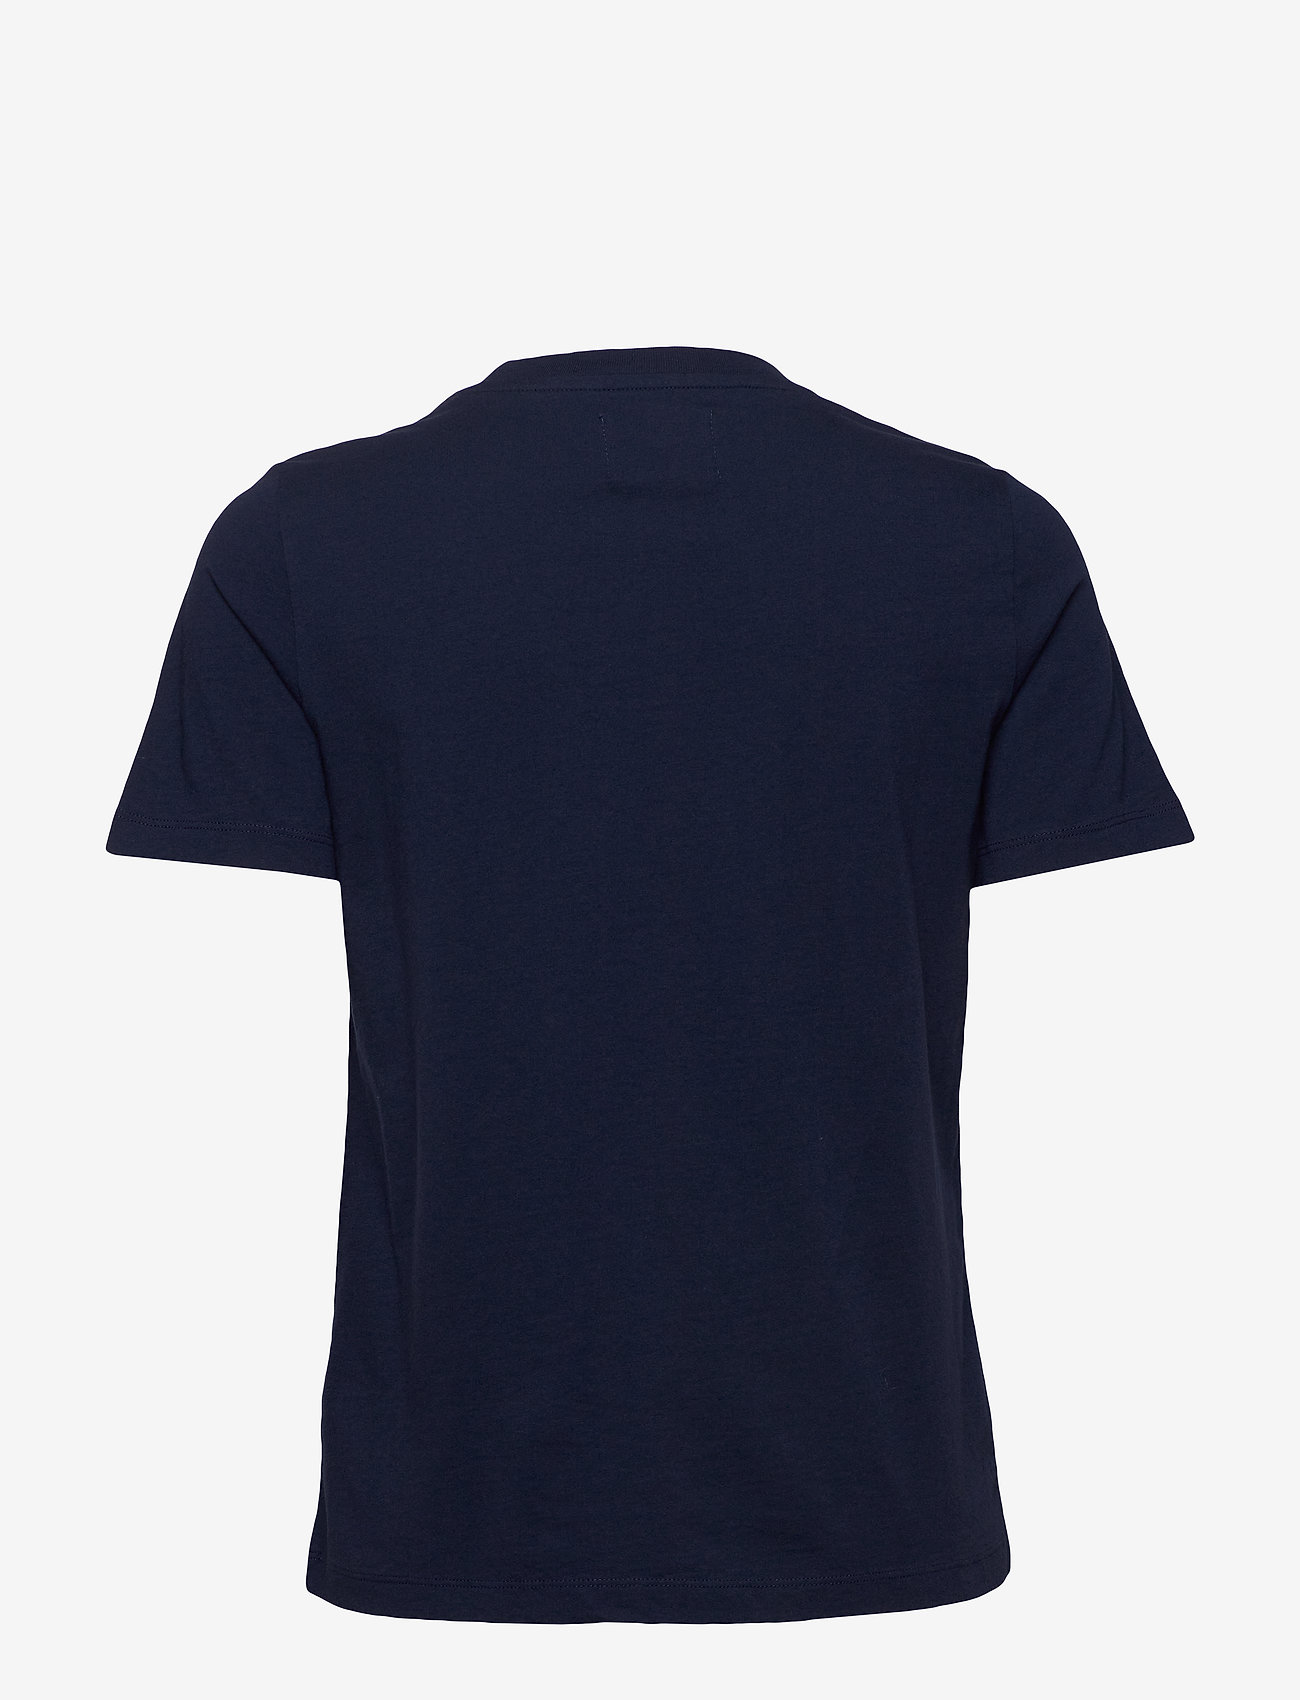 Double A by Wood Wood - Mia T-shirt - t-shirt & tops - navy - 1